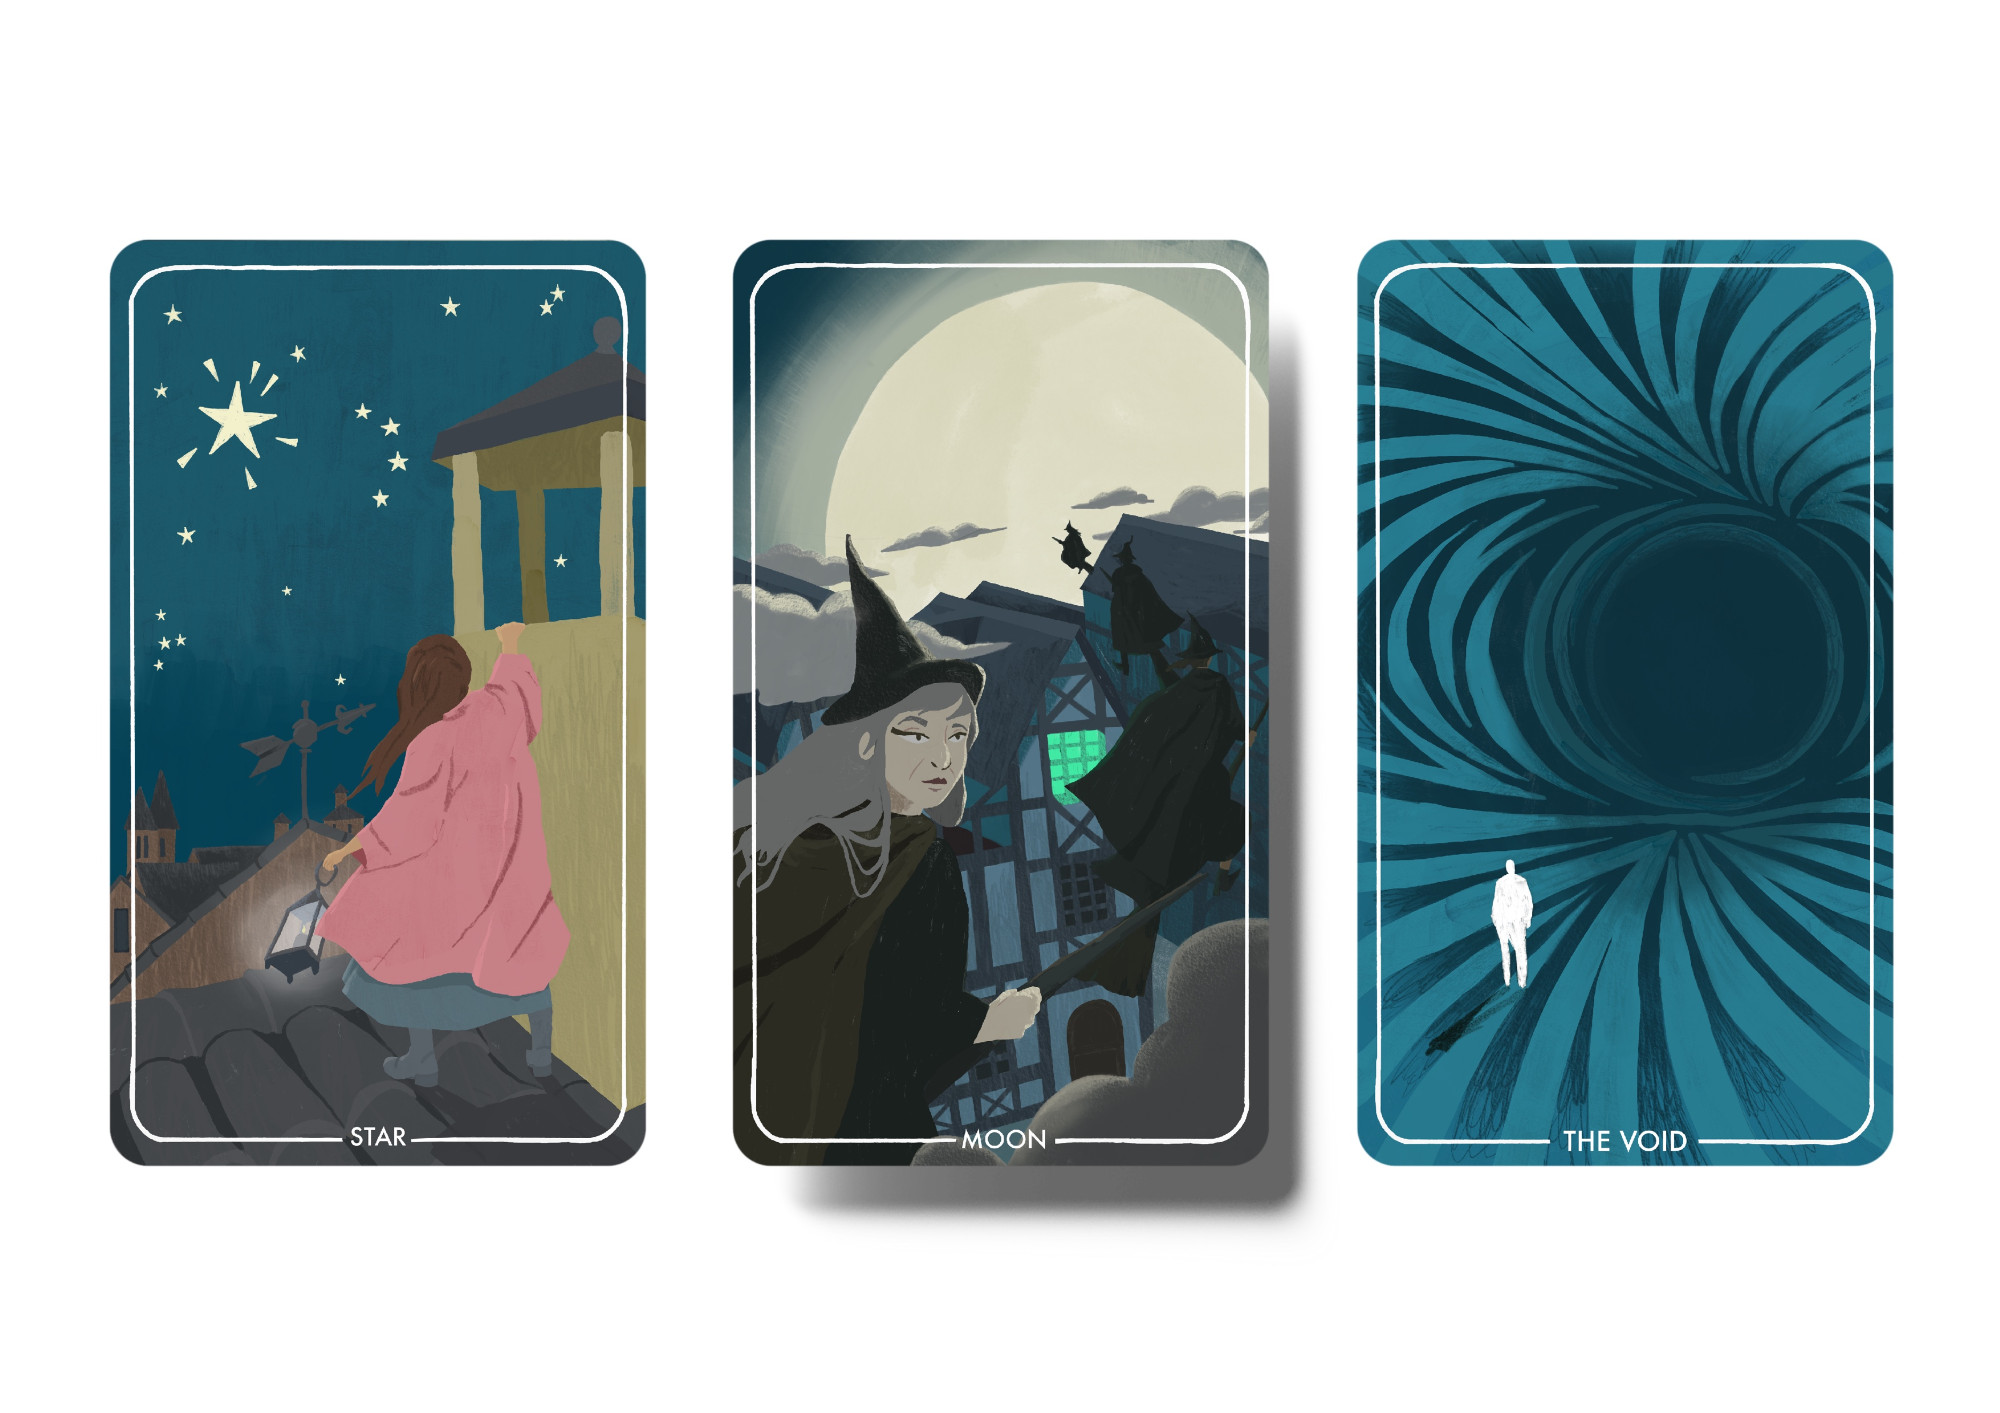 Selection of illustrated cards from the Deck of Many Things card pack